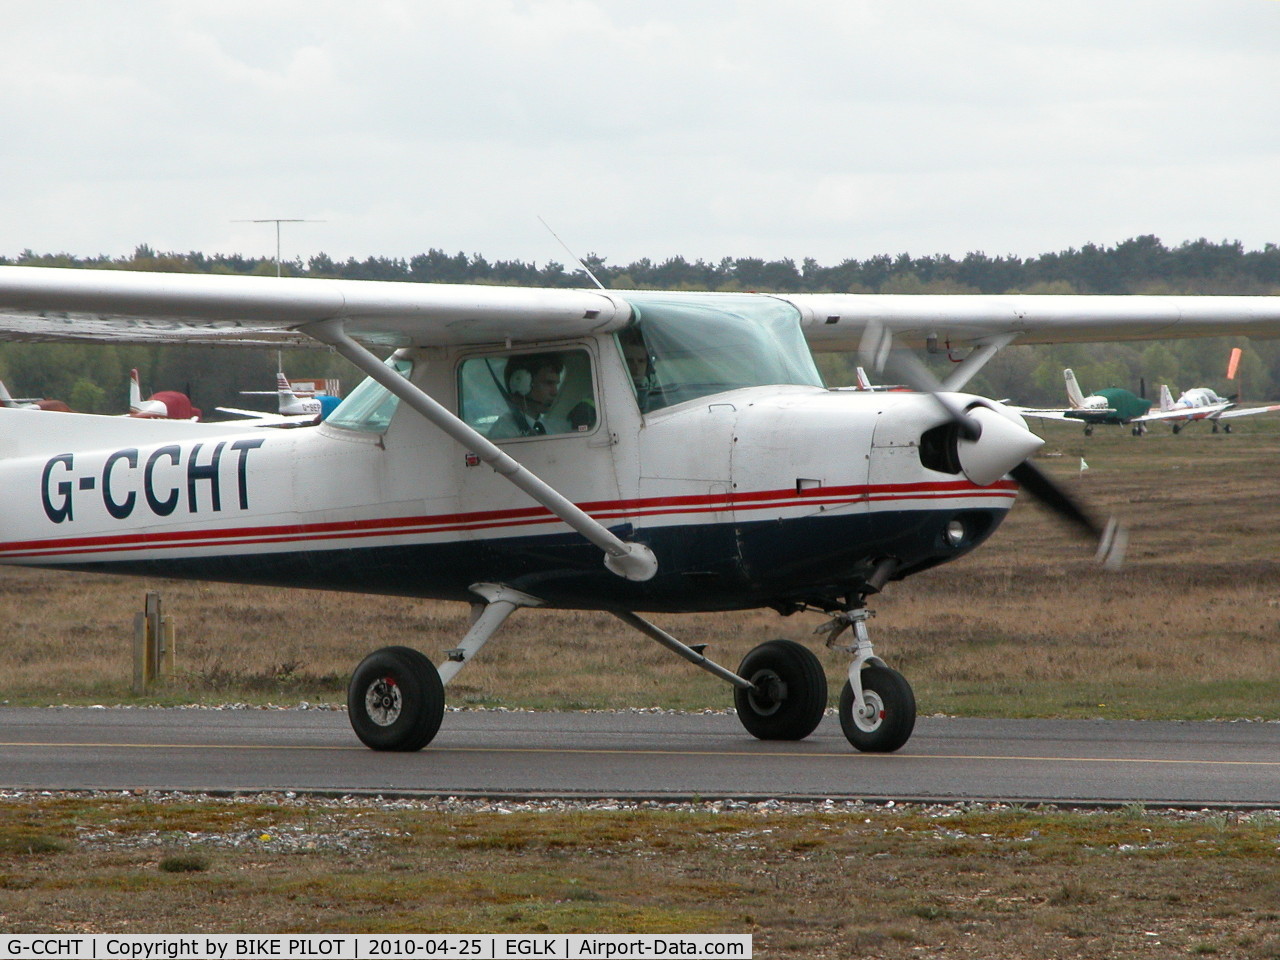 G-CCHT, 1983 Cessna 152 C/N 152-85176, HOTEL TANGO TAXYING TO RWY 25